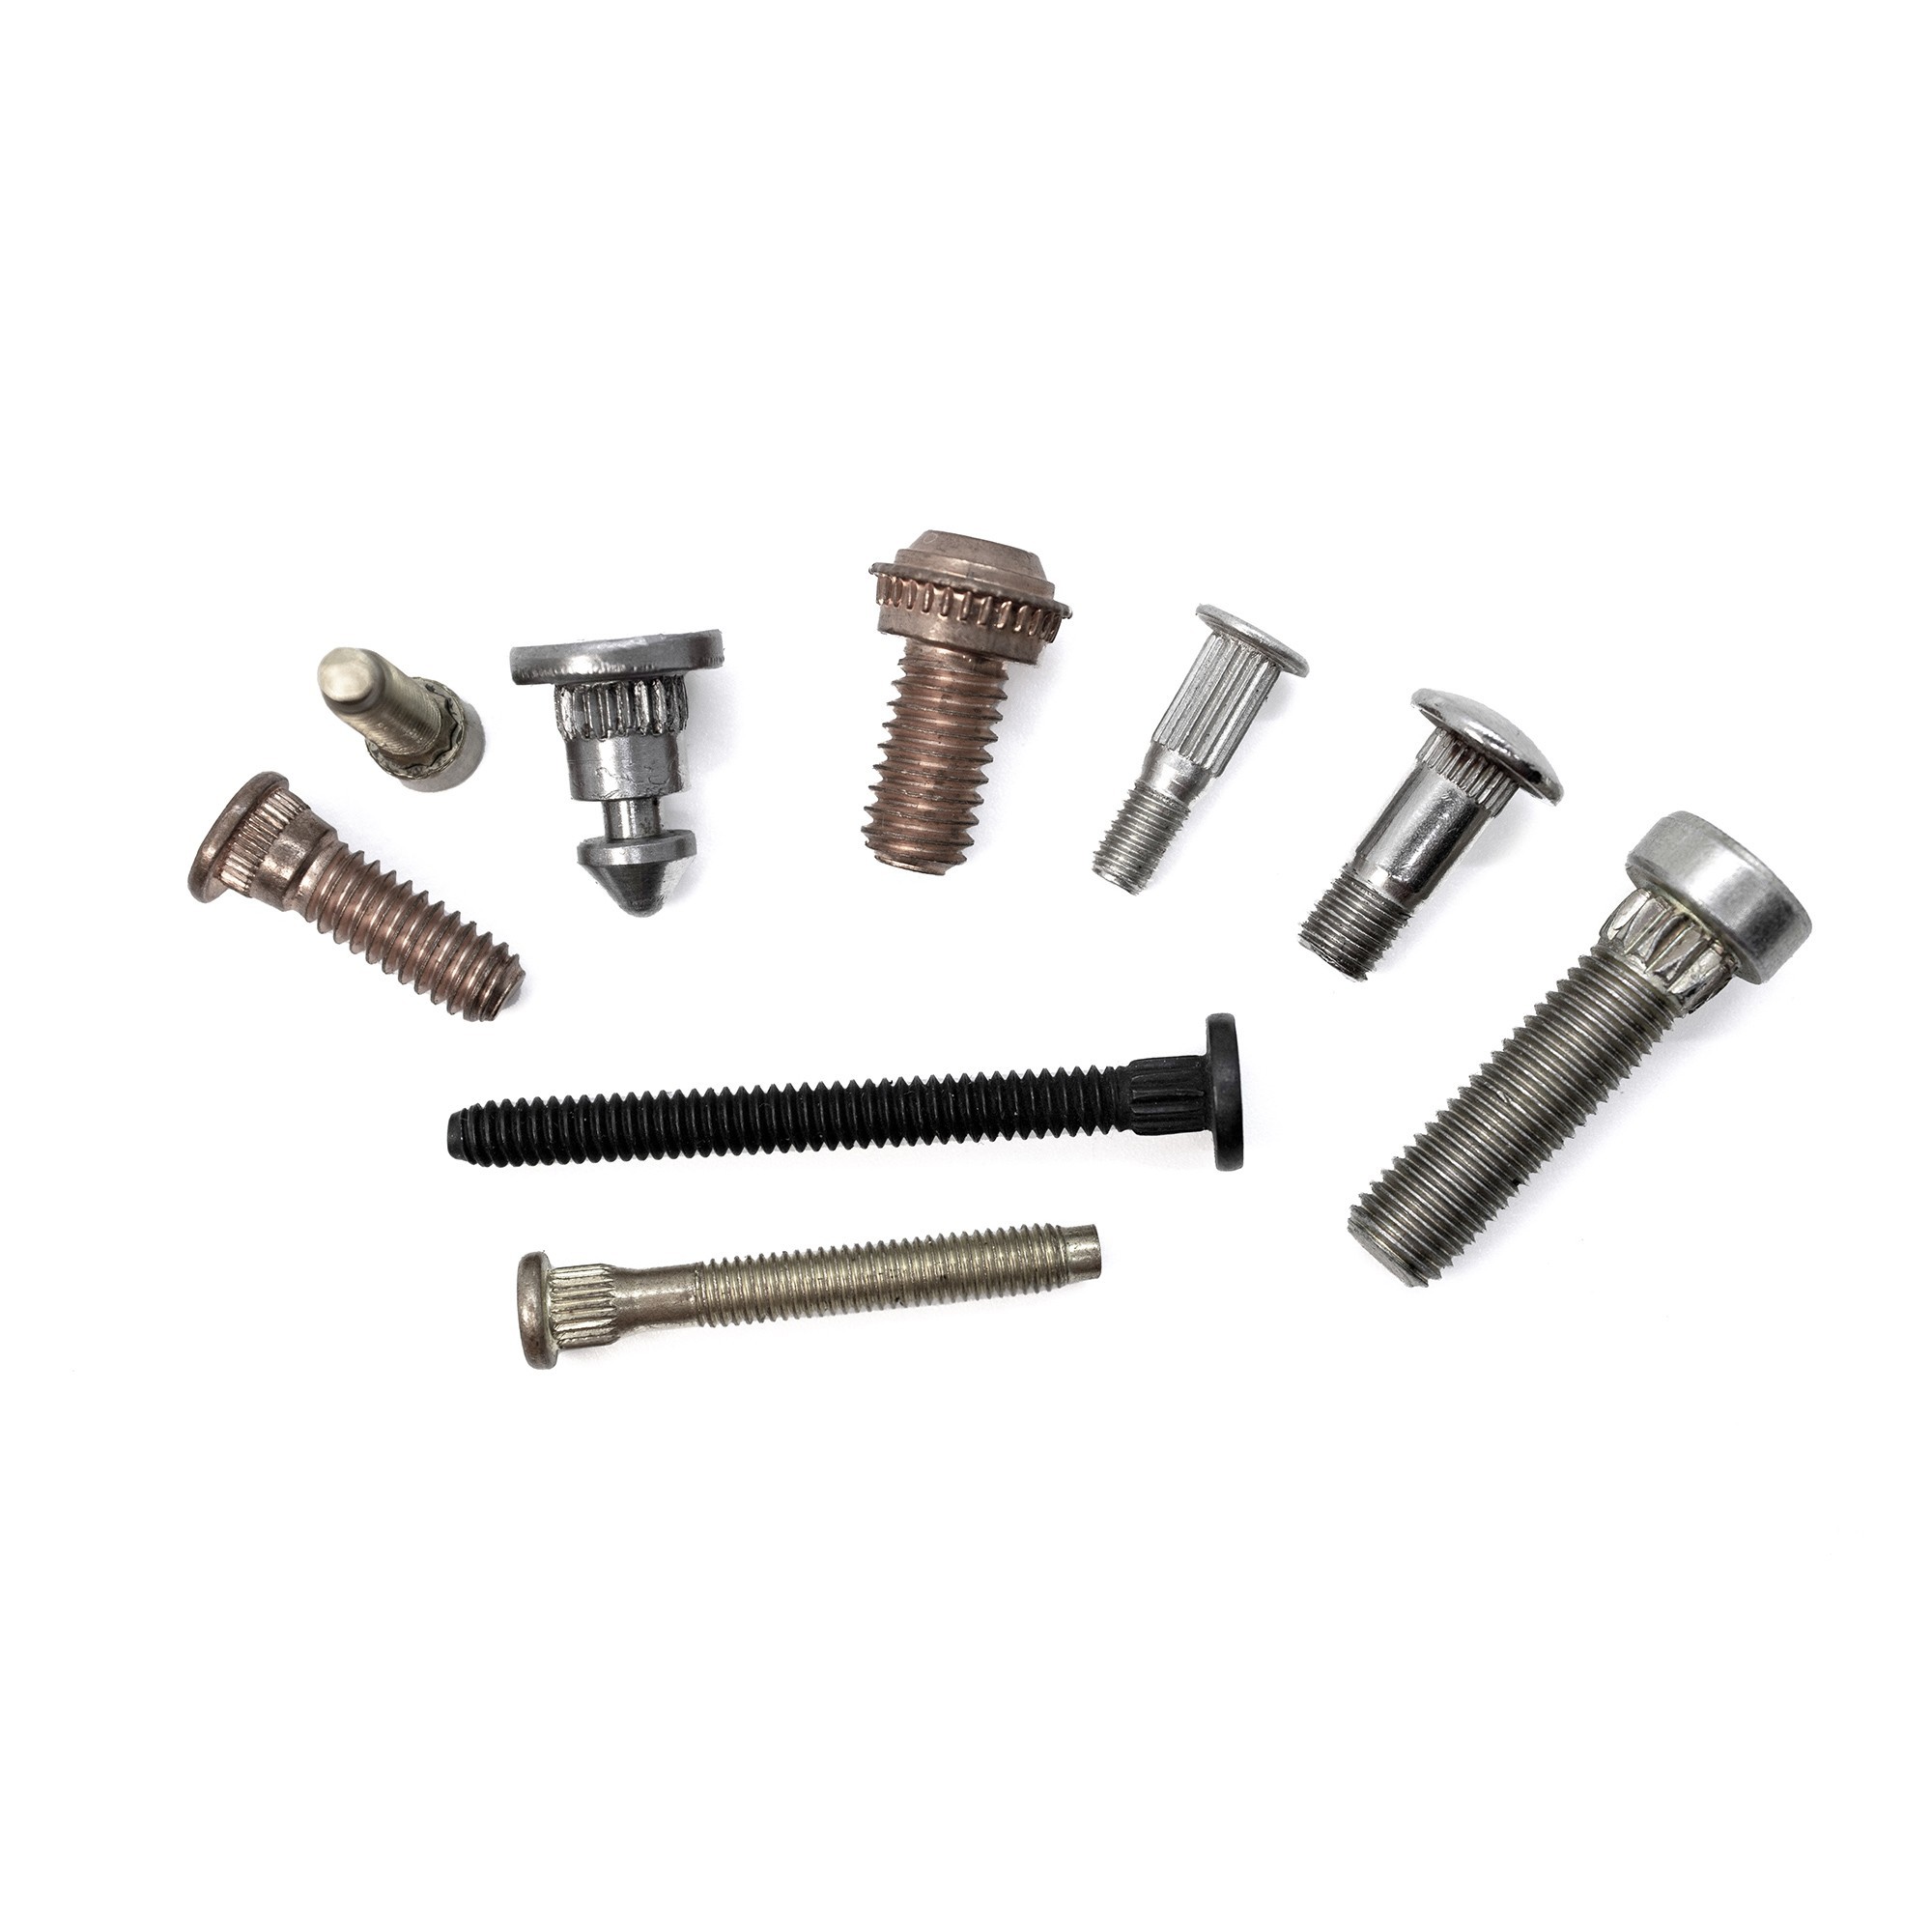 Custom Knurled Bolts for OEM Applications